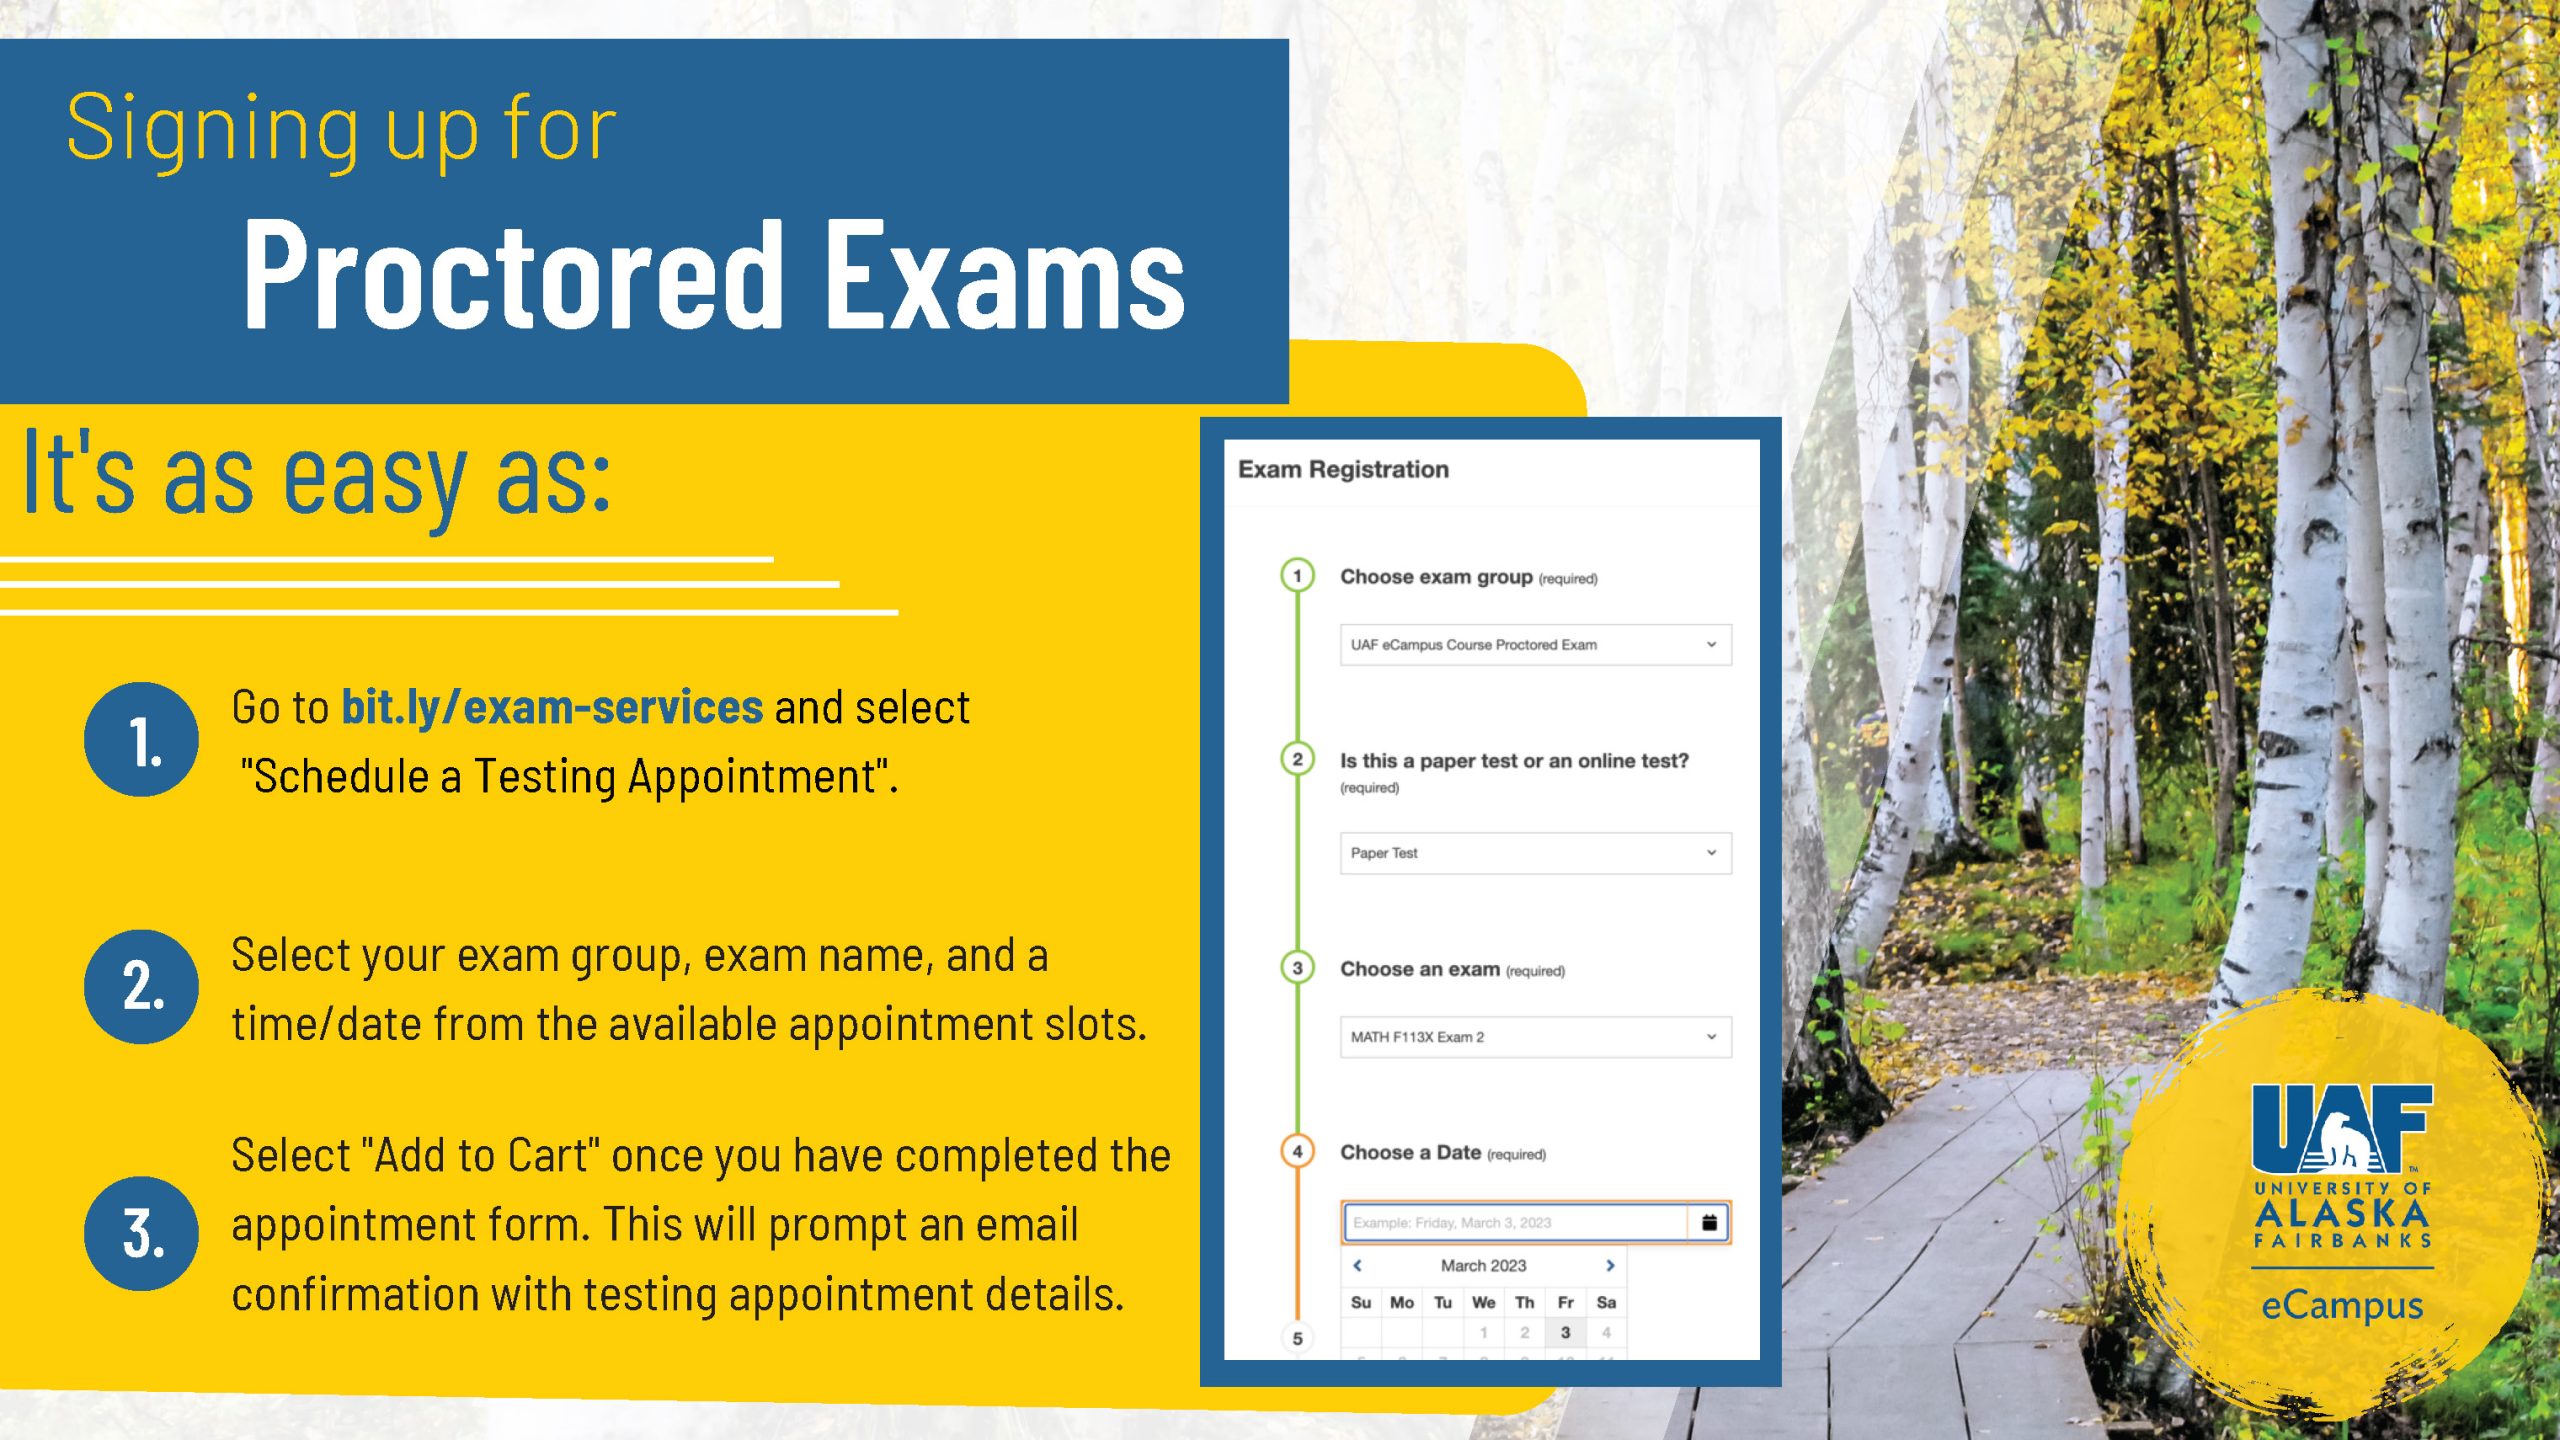 Steps for scheduling an proctored exam appointment